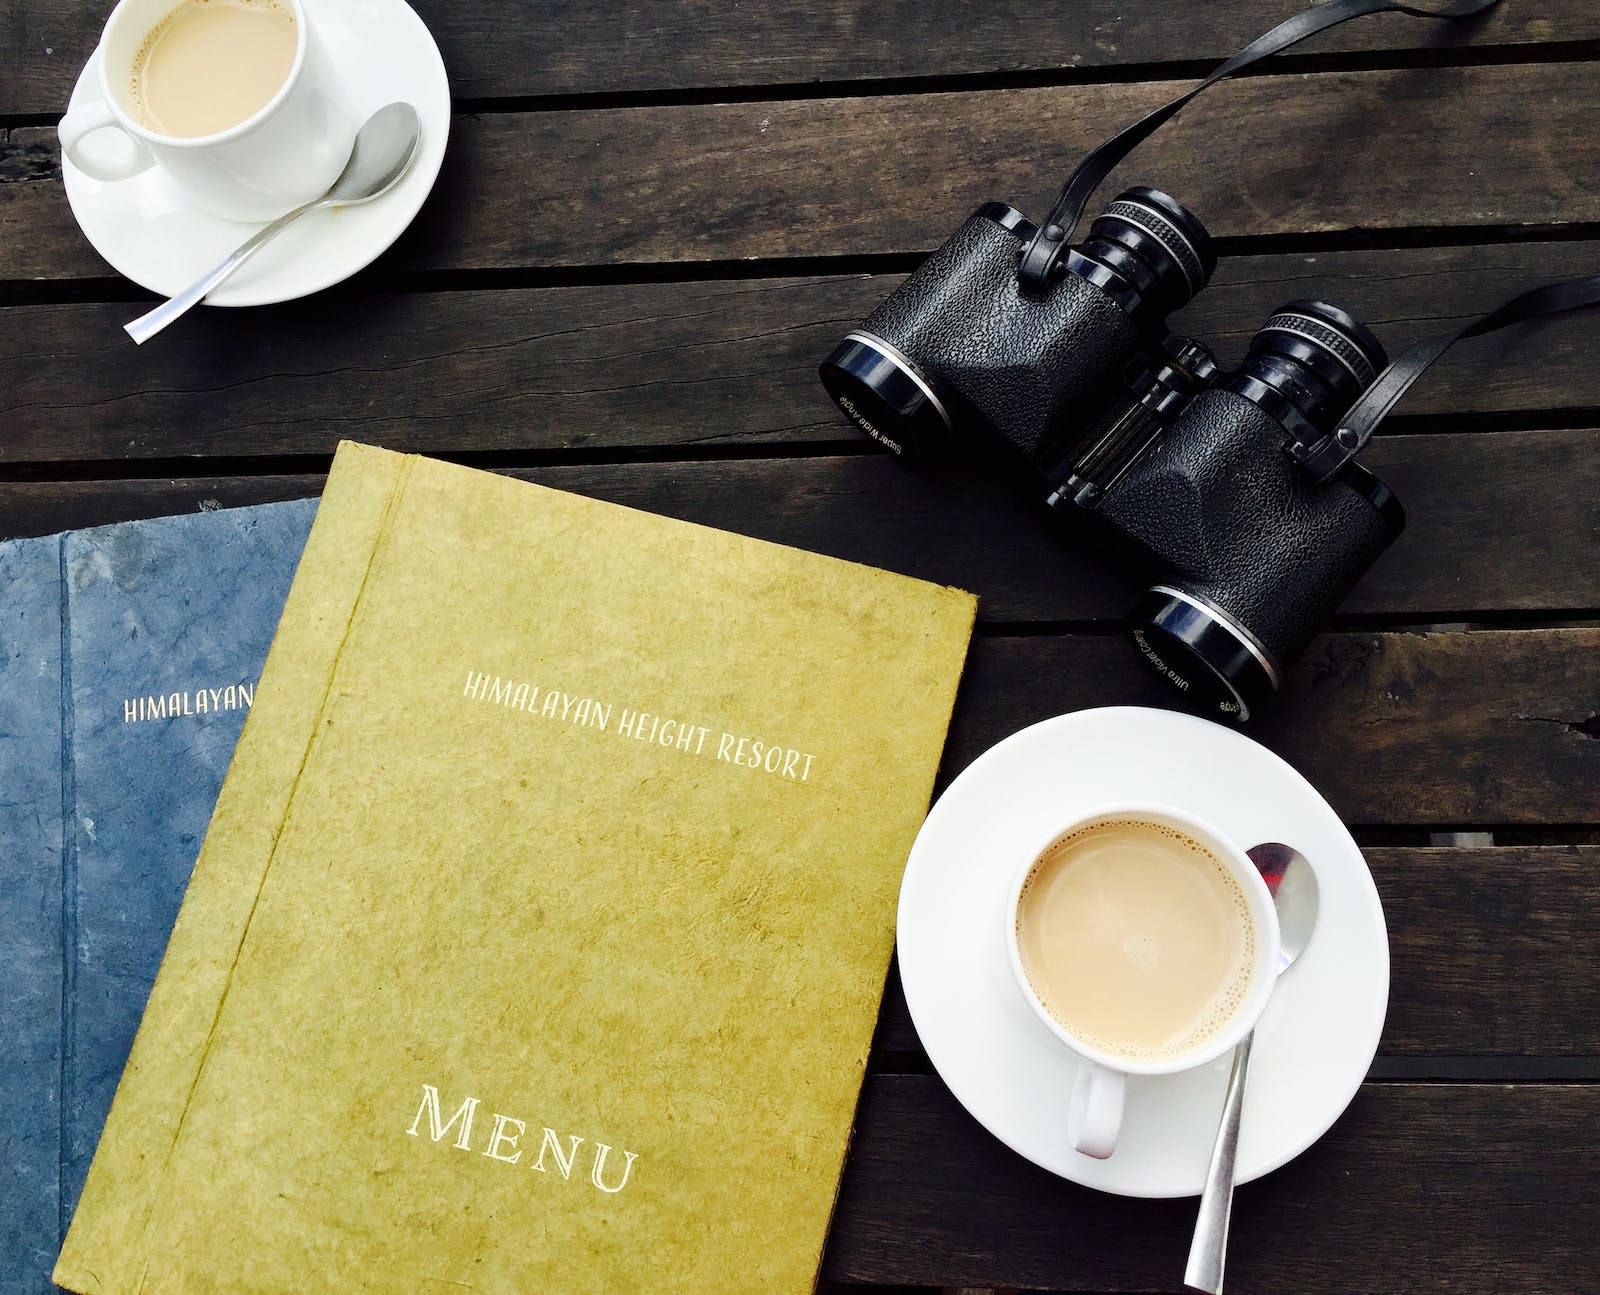 image with cup of tea, professional note books and a pair of black binoculars